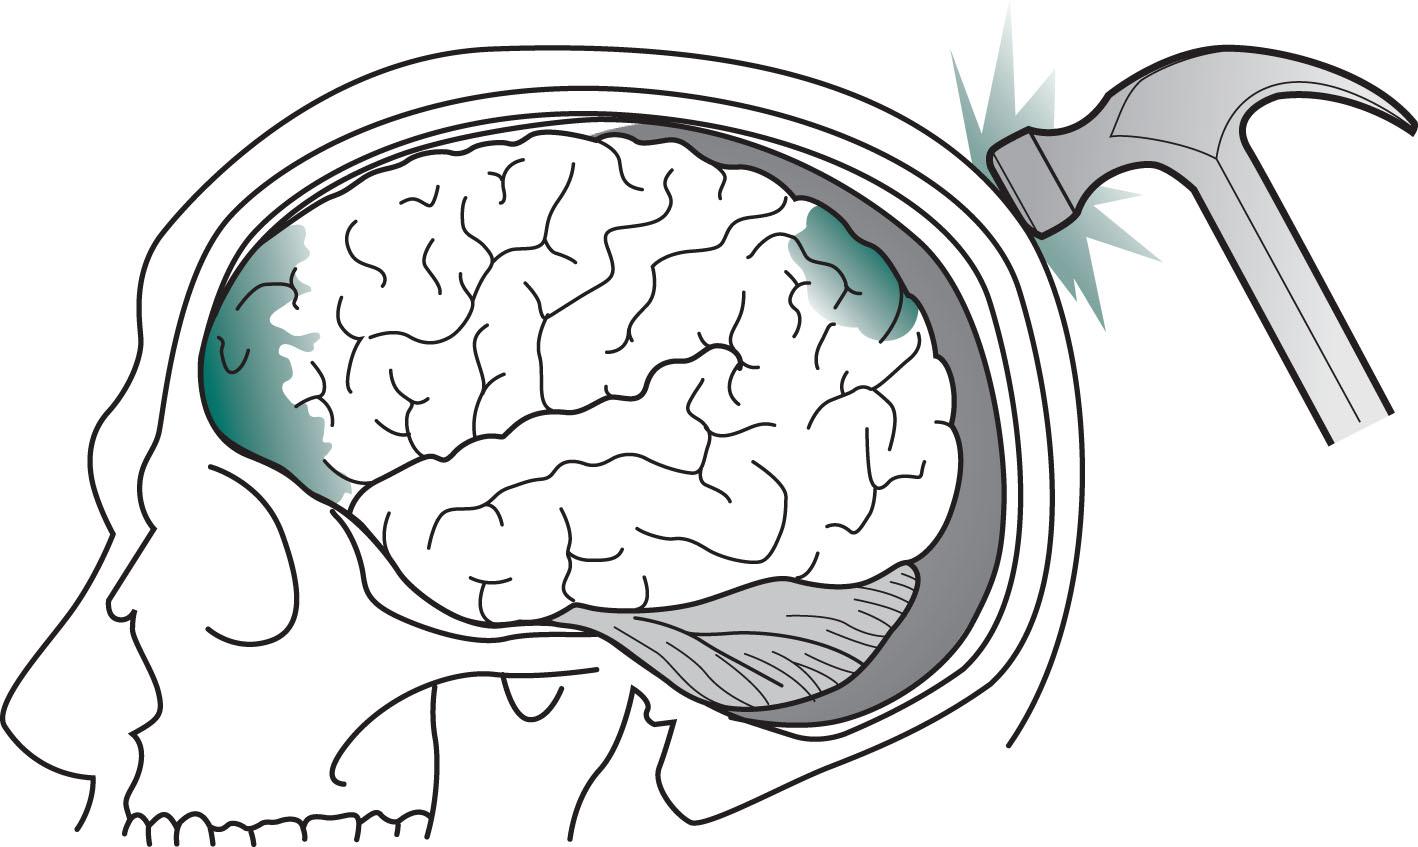 Fig. 22.1, In this drawing, a hammer blow to the back of the head inflicts a coup injury to the occipital region and, as is typical, a more extensive contrecoup injury to the inferior surface of the frontal and anterior tips of the temporal lobes.